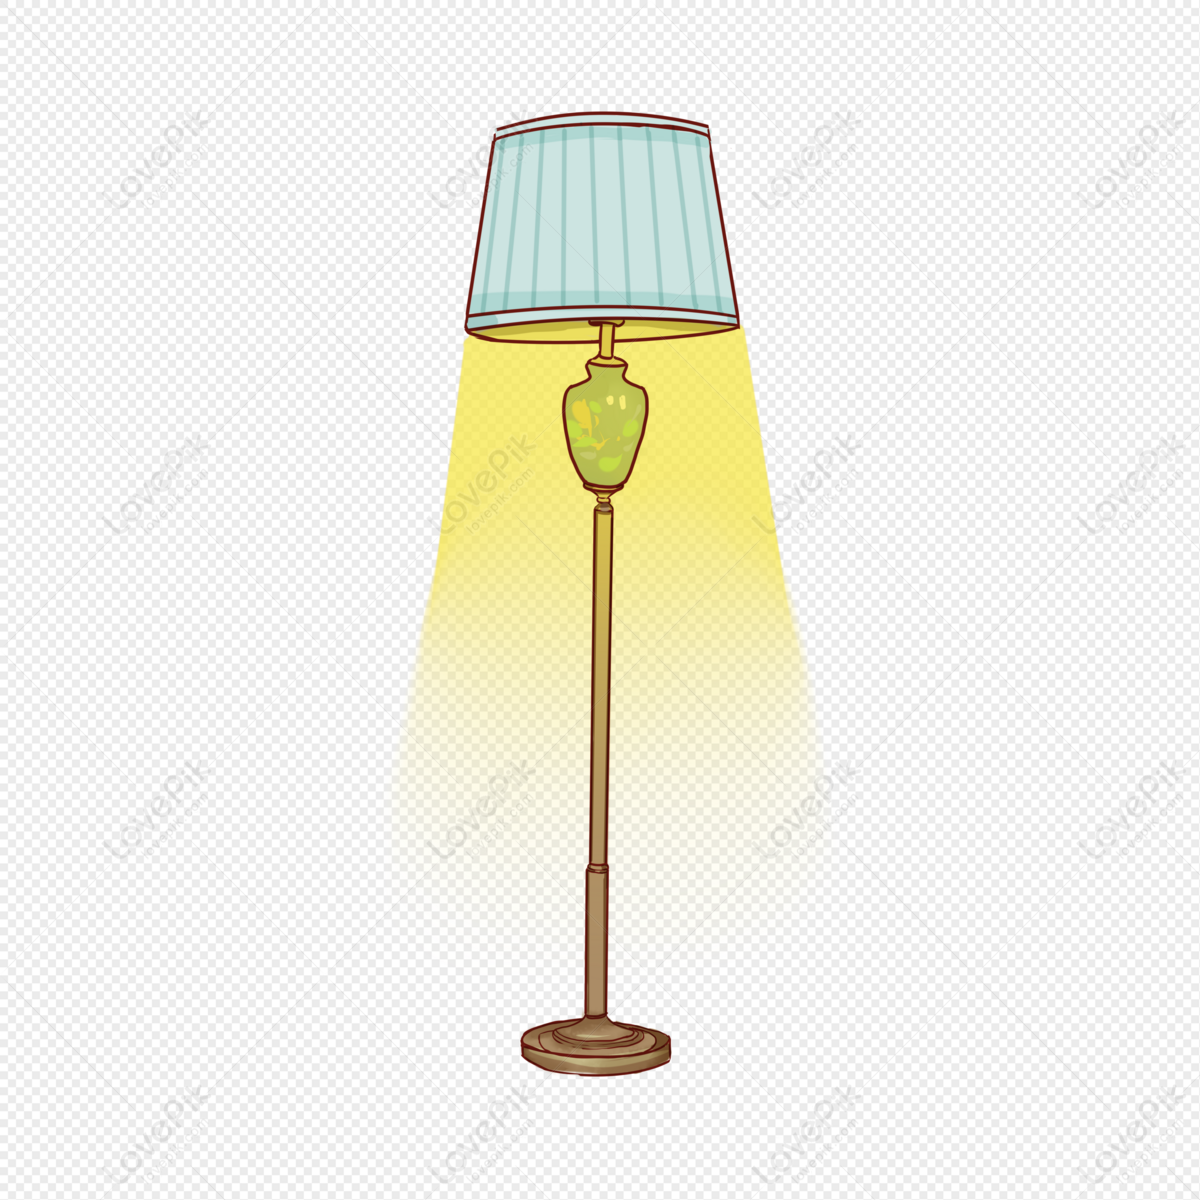 Floor Lamp PNG Hd Transparent Image And Clipart Image For Free Download -  Lovepik | 401542514